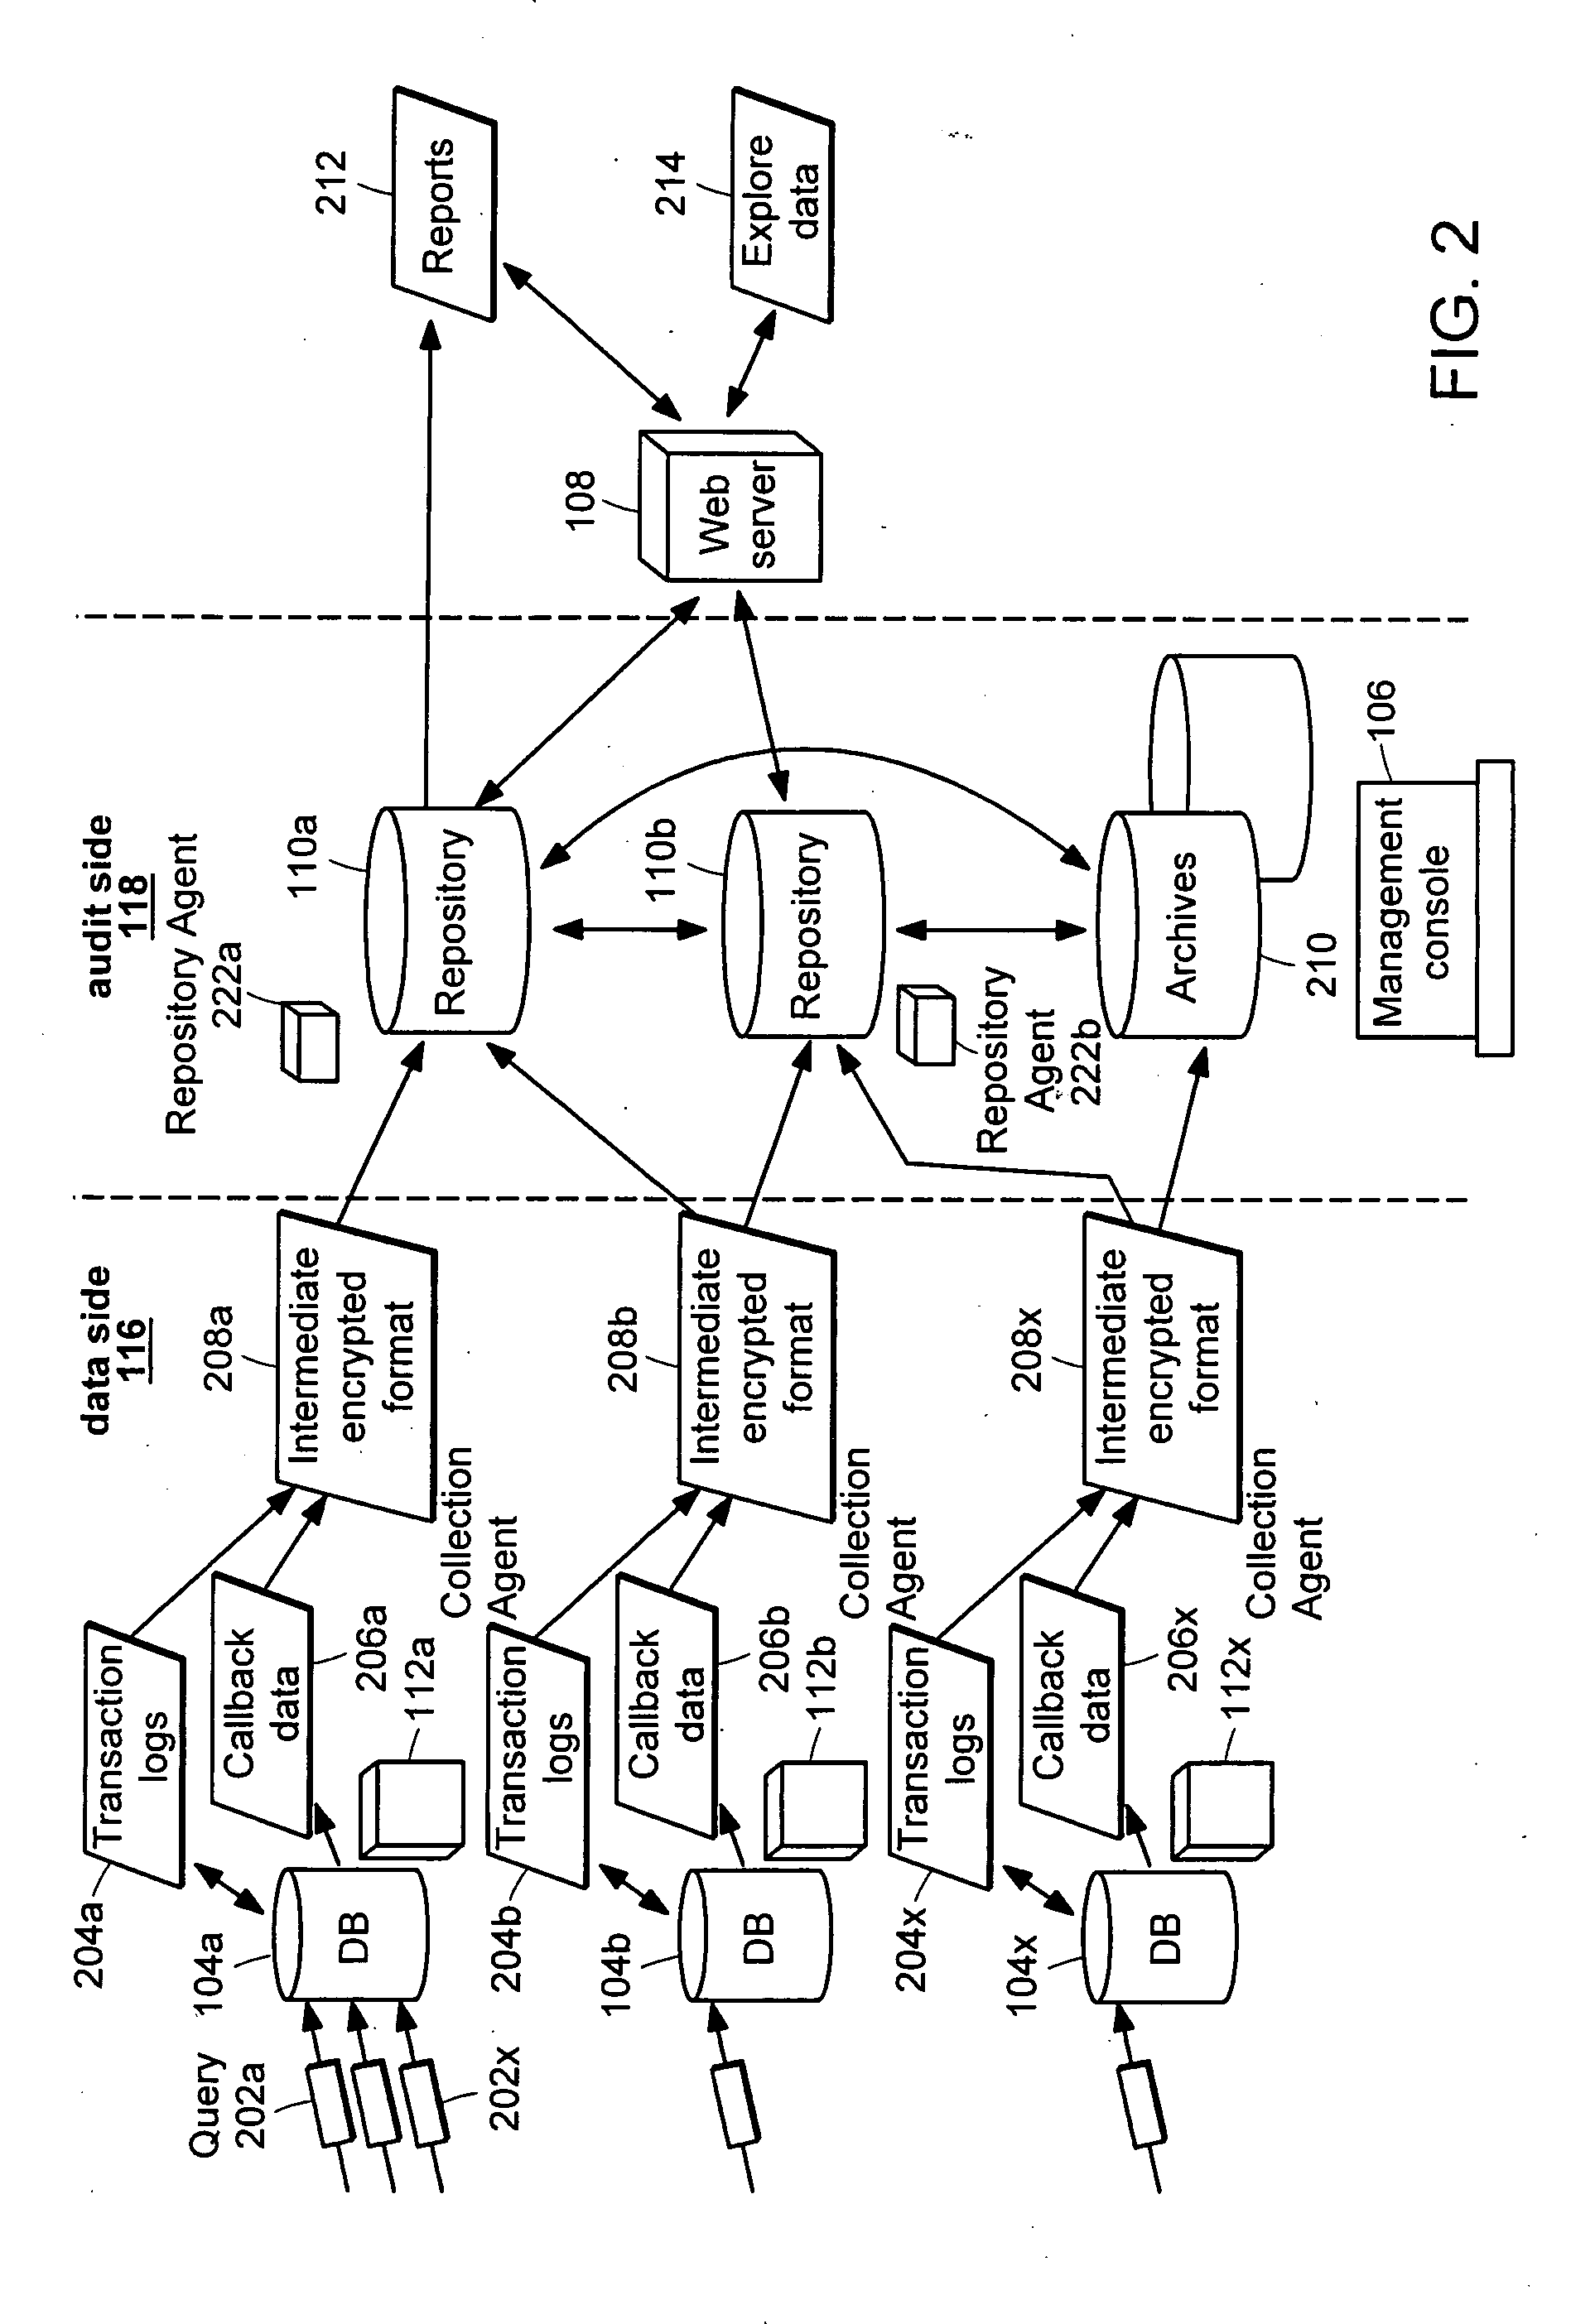 Separation of duties in a data audit system